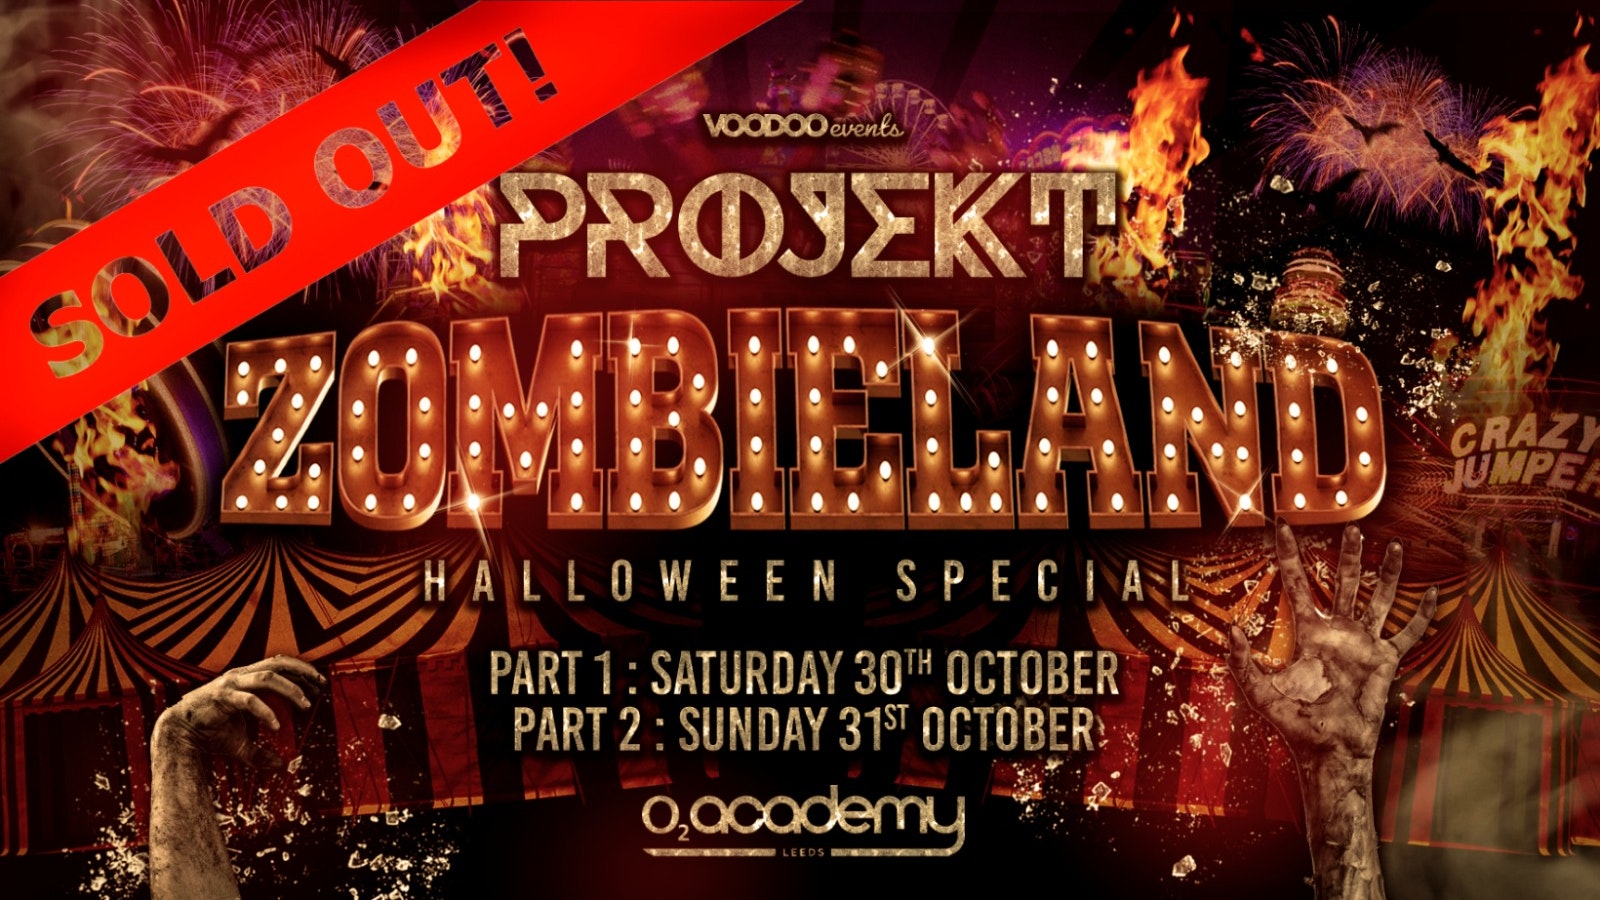 Projekt Zombieland Halloween Special Part 1 at the O2 Academy- 30th October  (ADVANCE TICKETS SOLD OUT – Limited spaces on the door)